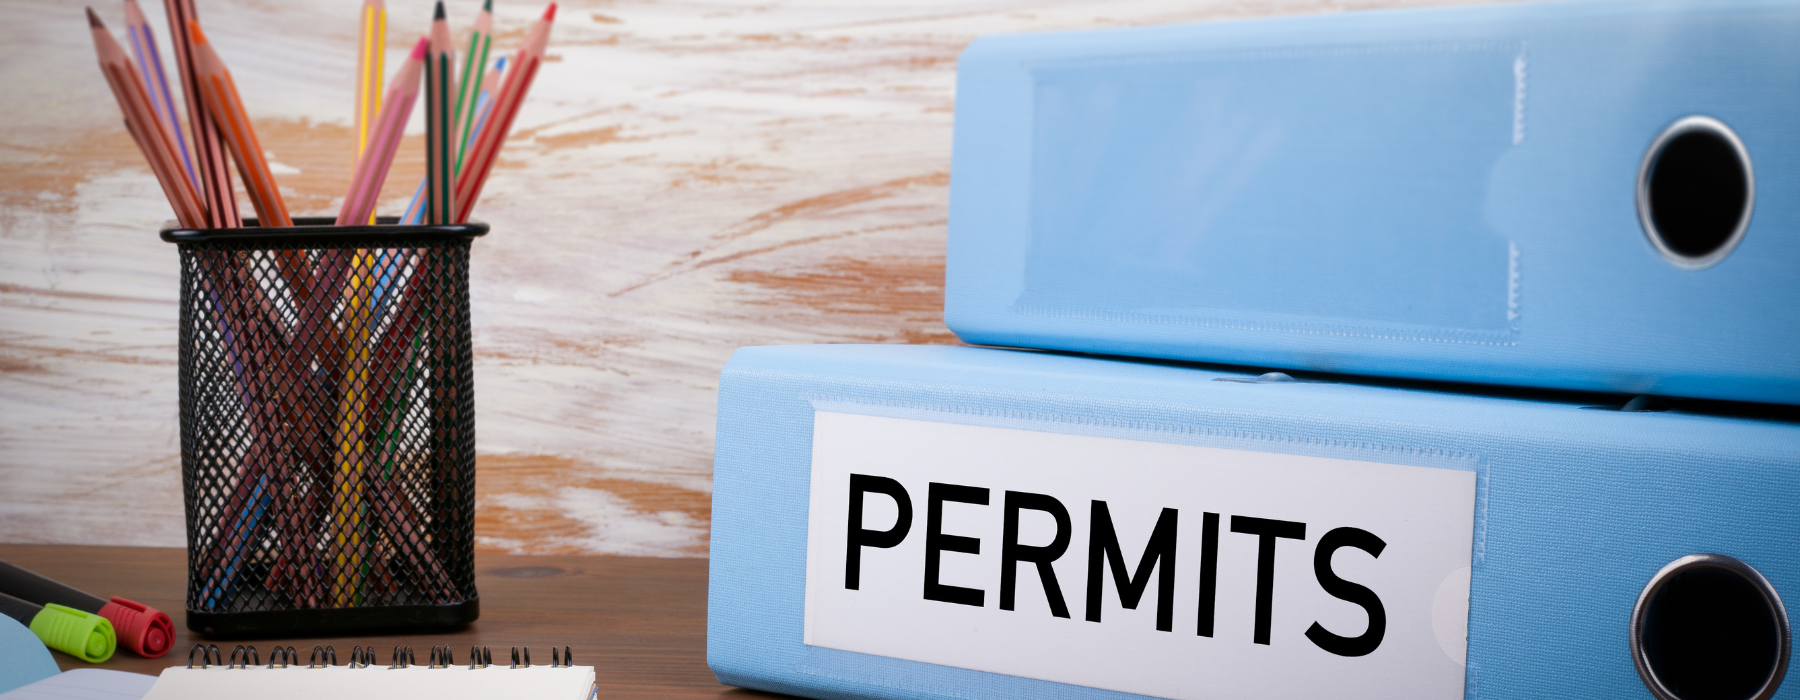 Why do I need to apply for permits through council and what types are there?